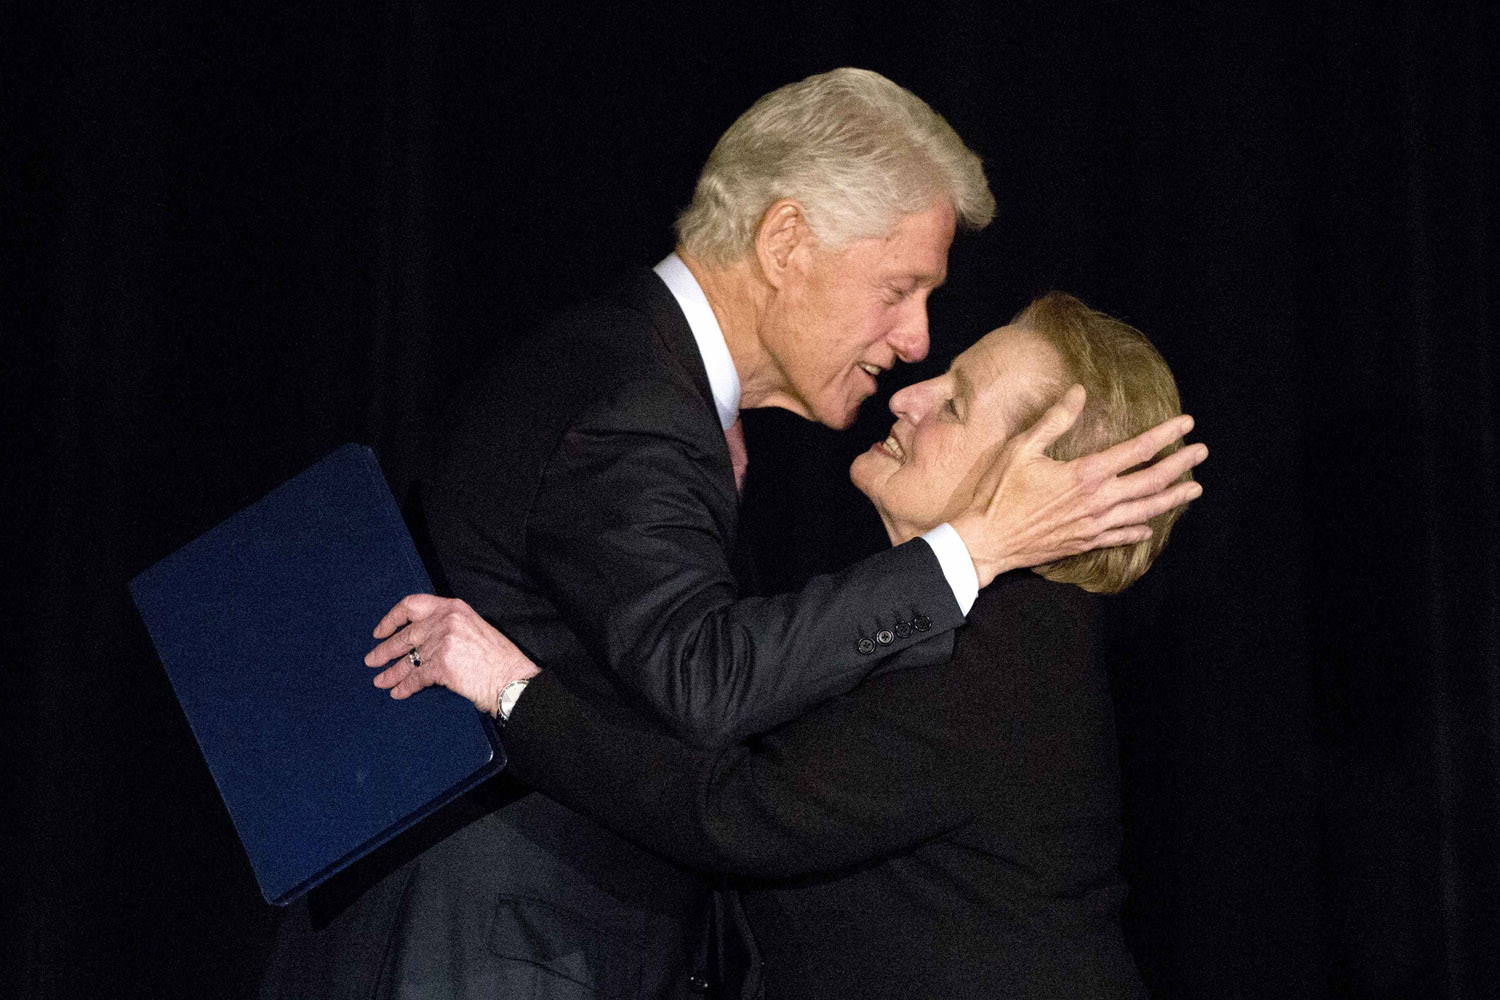 Former U.S. President Bill Clinton greets Former Secretary of State Madeleine Albright on stage at the Annual Freedom Award Benefit Event hosted by the International Rescue Committee at the Waldorf-Astoria in New York